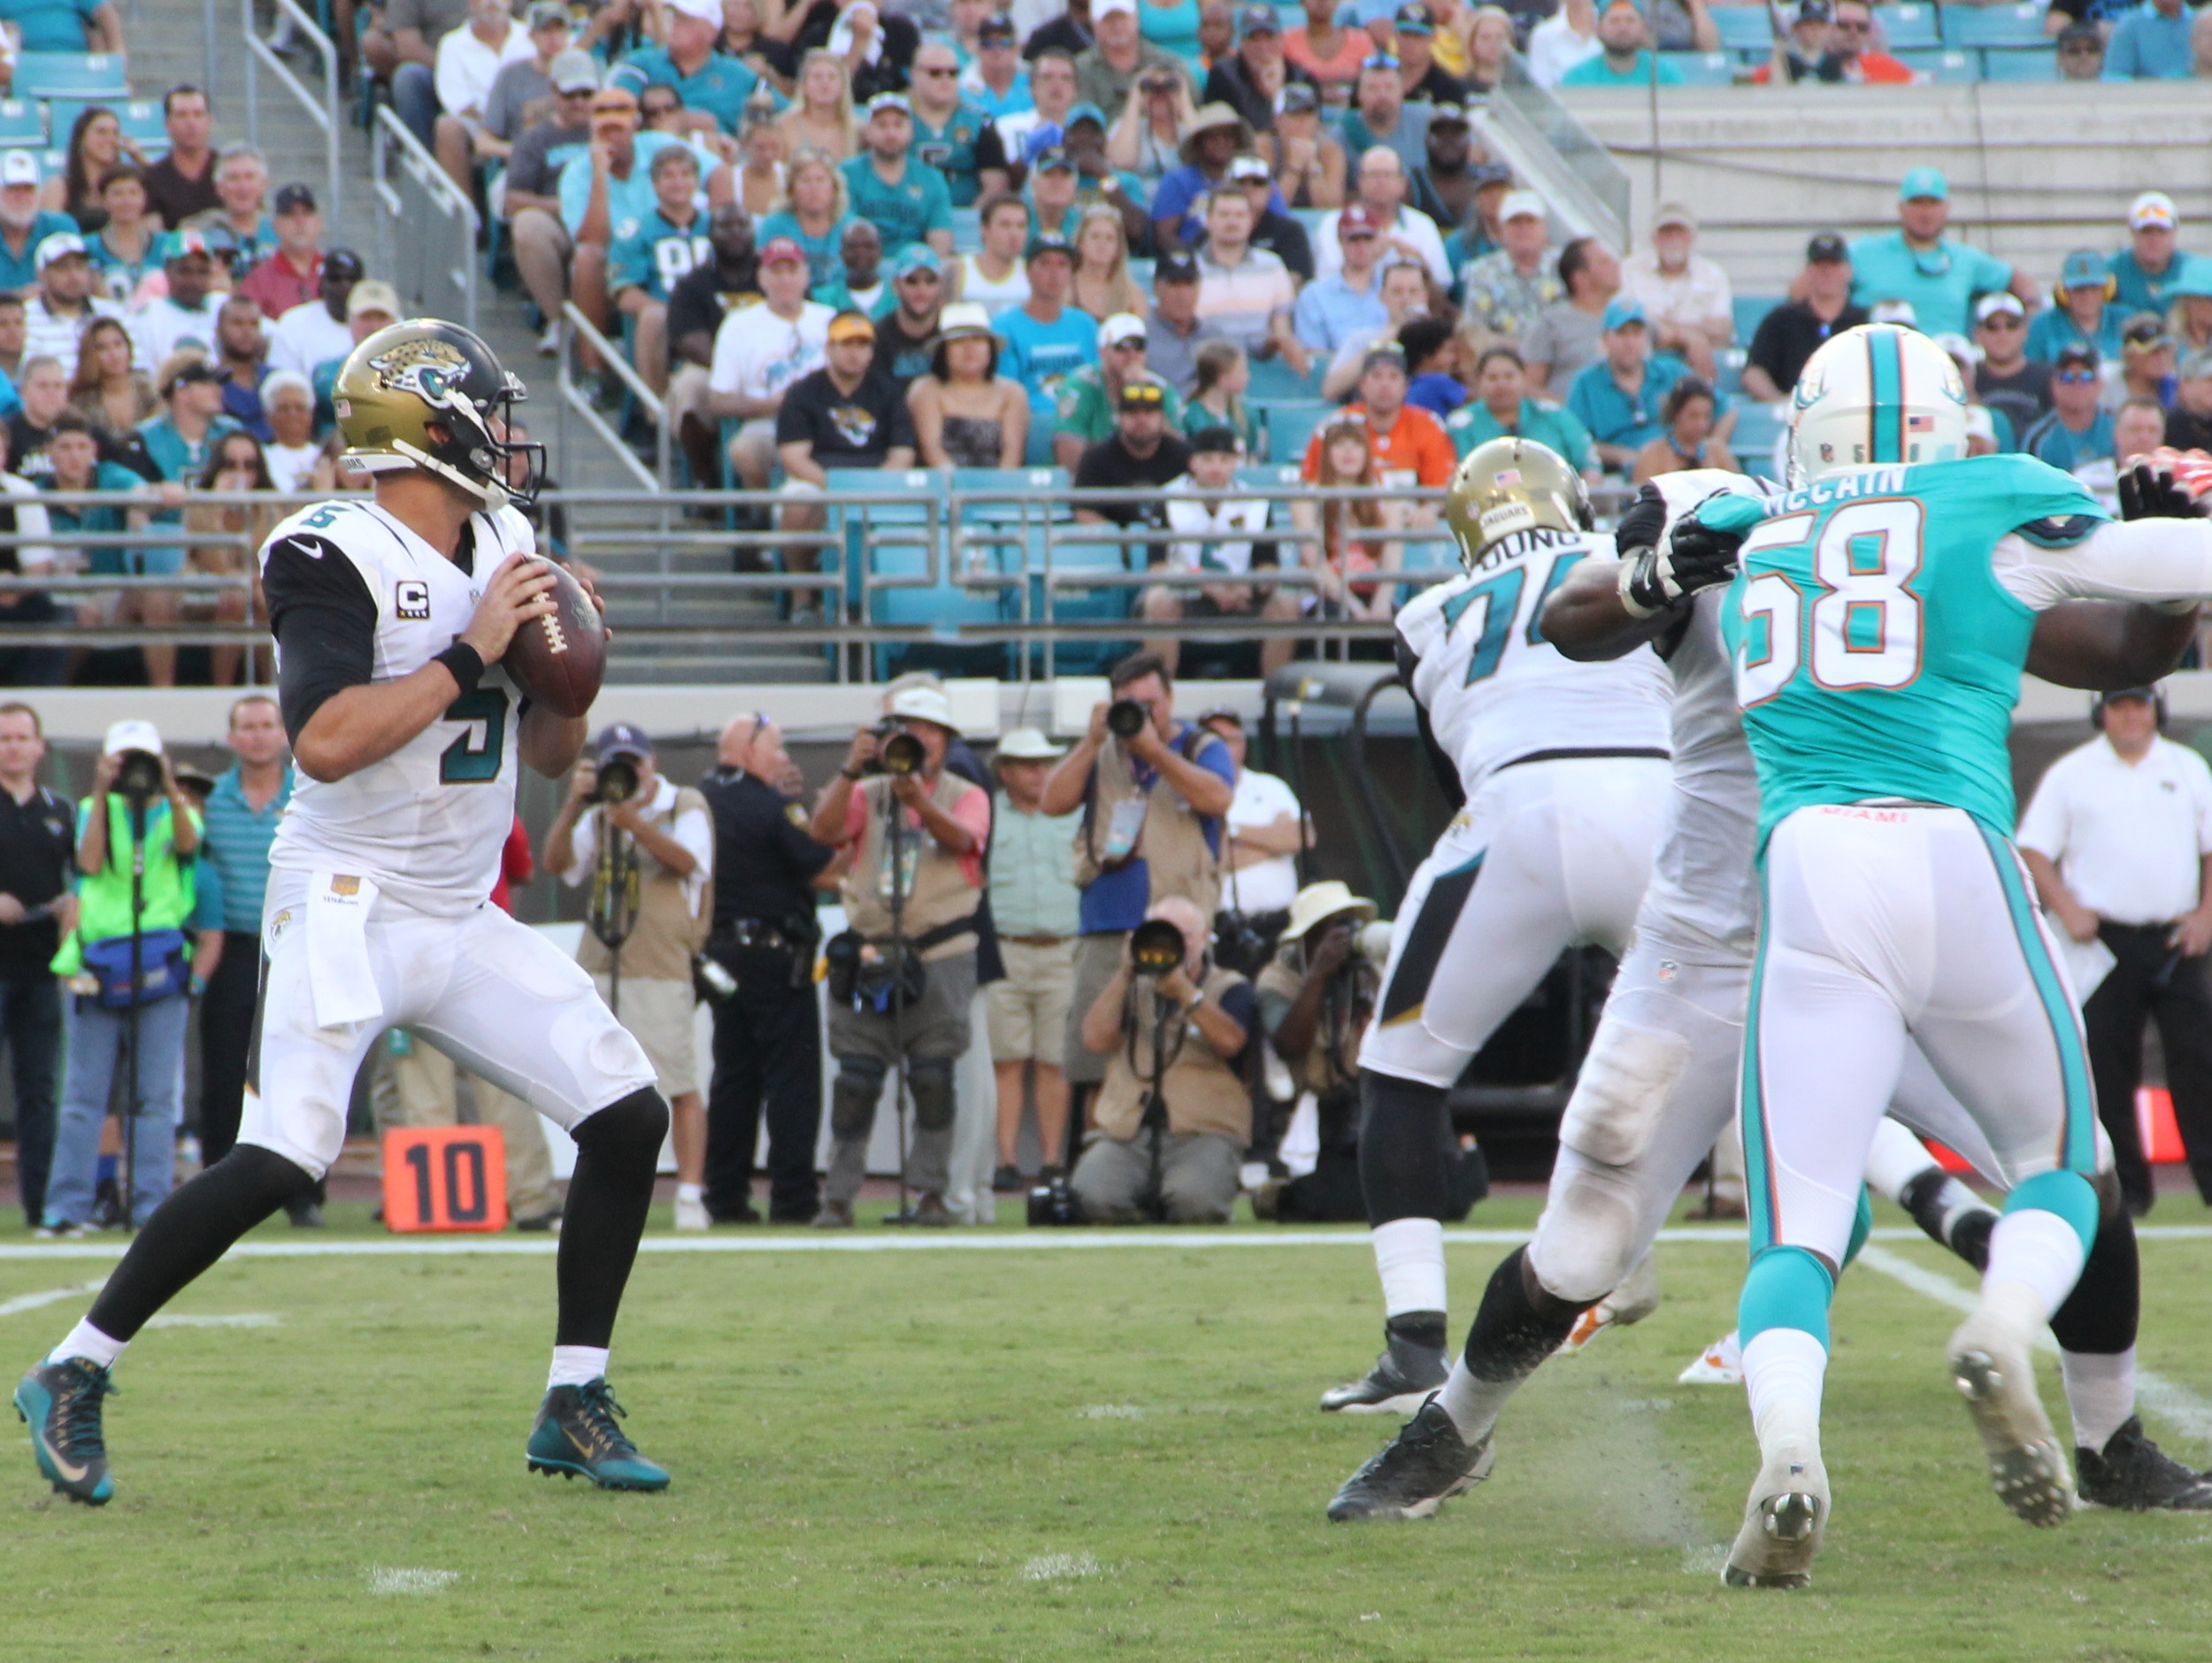 Jacksonville QB Blake Bortles was 18 of 33 for 273 yards, with two touchdowns to Allen Robinson, no turnovers or sacks.